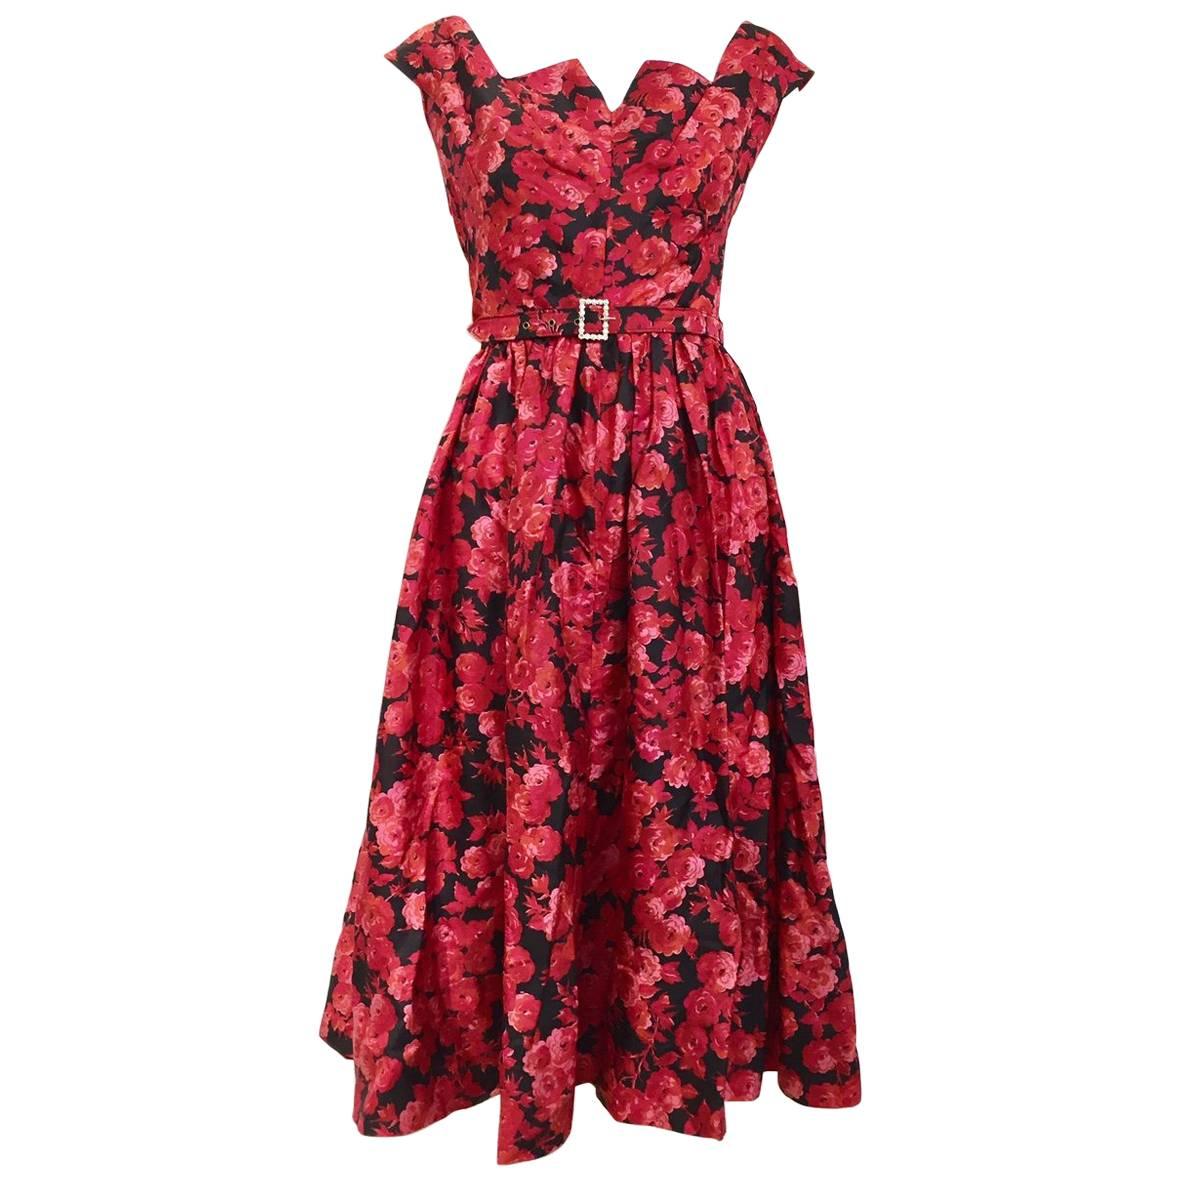 1950s floral print red and black floral print cocktail dress